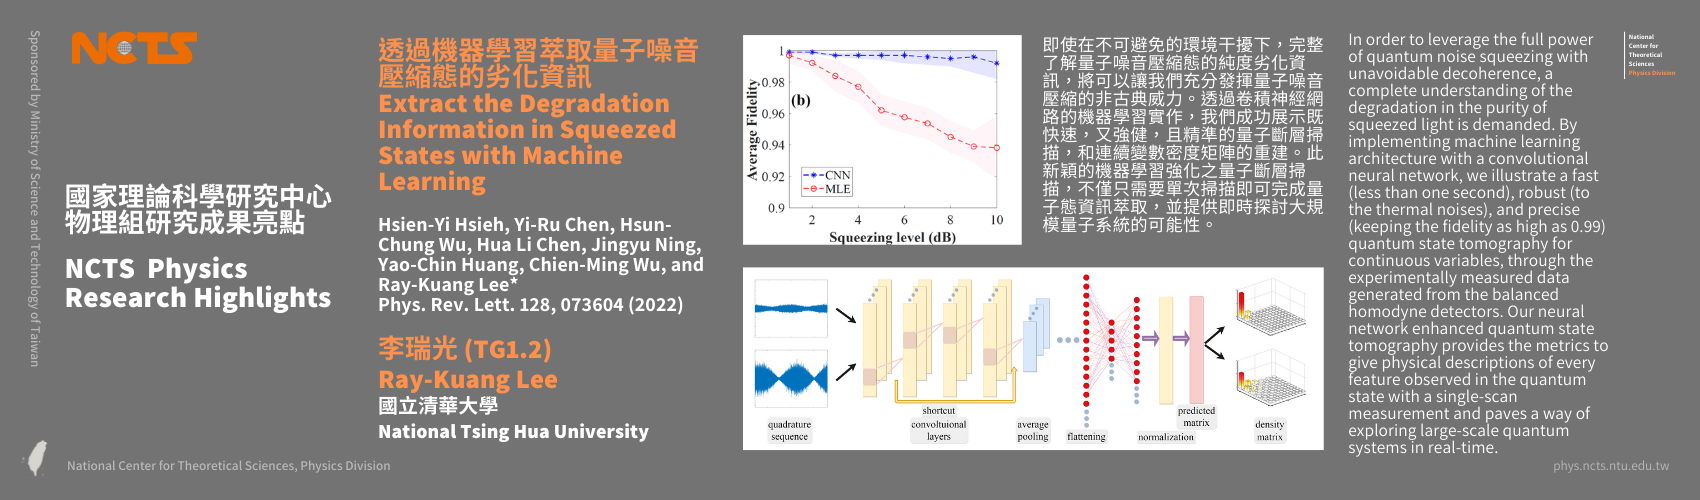 [NCTS Physics Research Highlights] Ray-Kuang Lee 'Extract the Degradation Information in Squeezed States with Machine Learning', Physical Review Letters (2022)